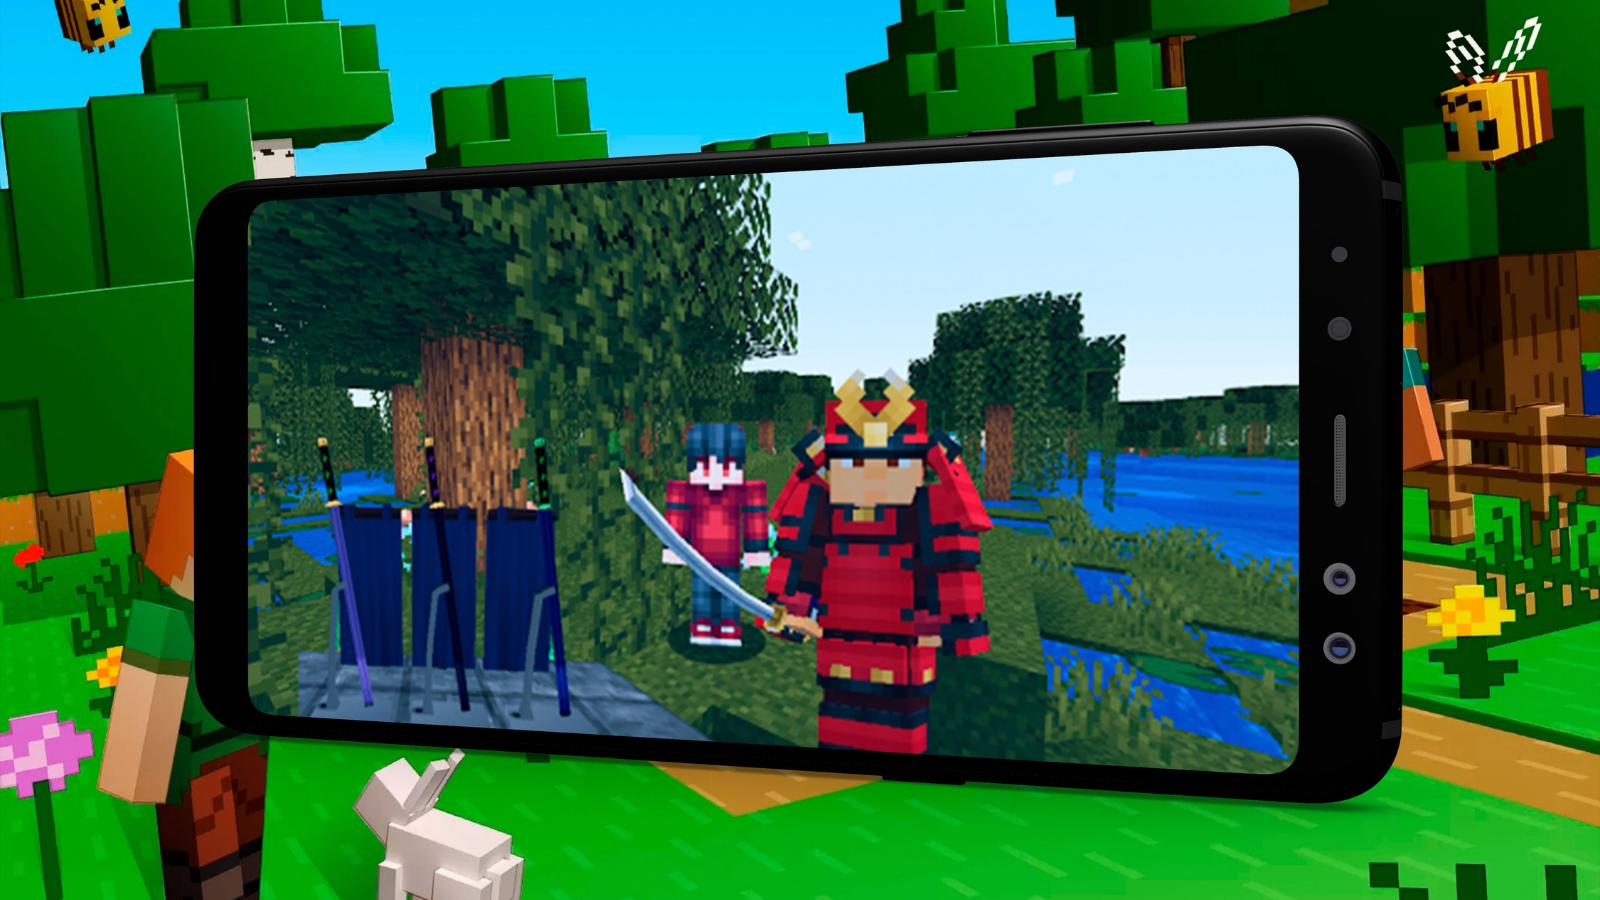 Swords Mod for Minecraft for Android - Free App Download